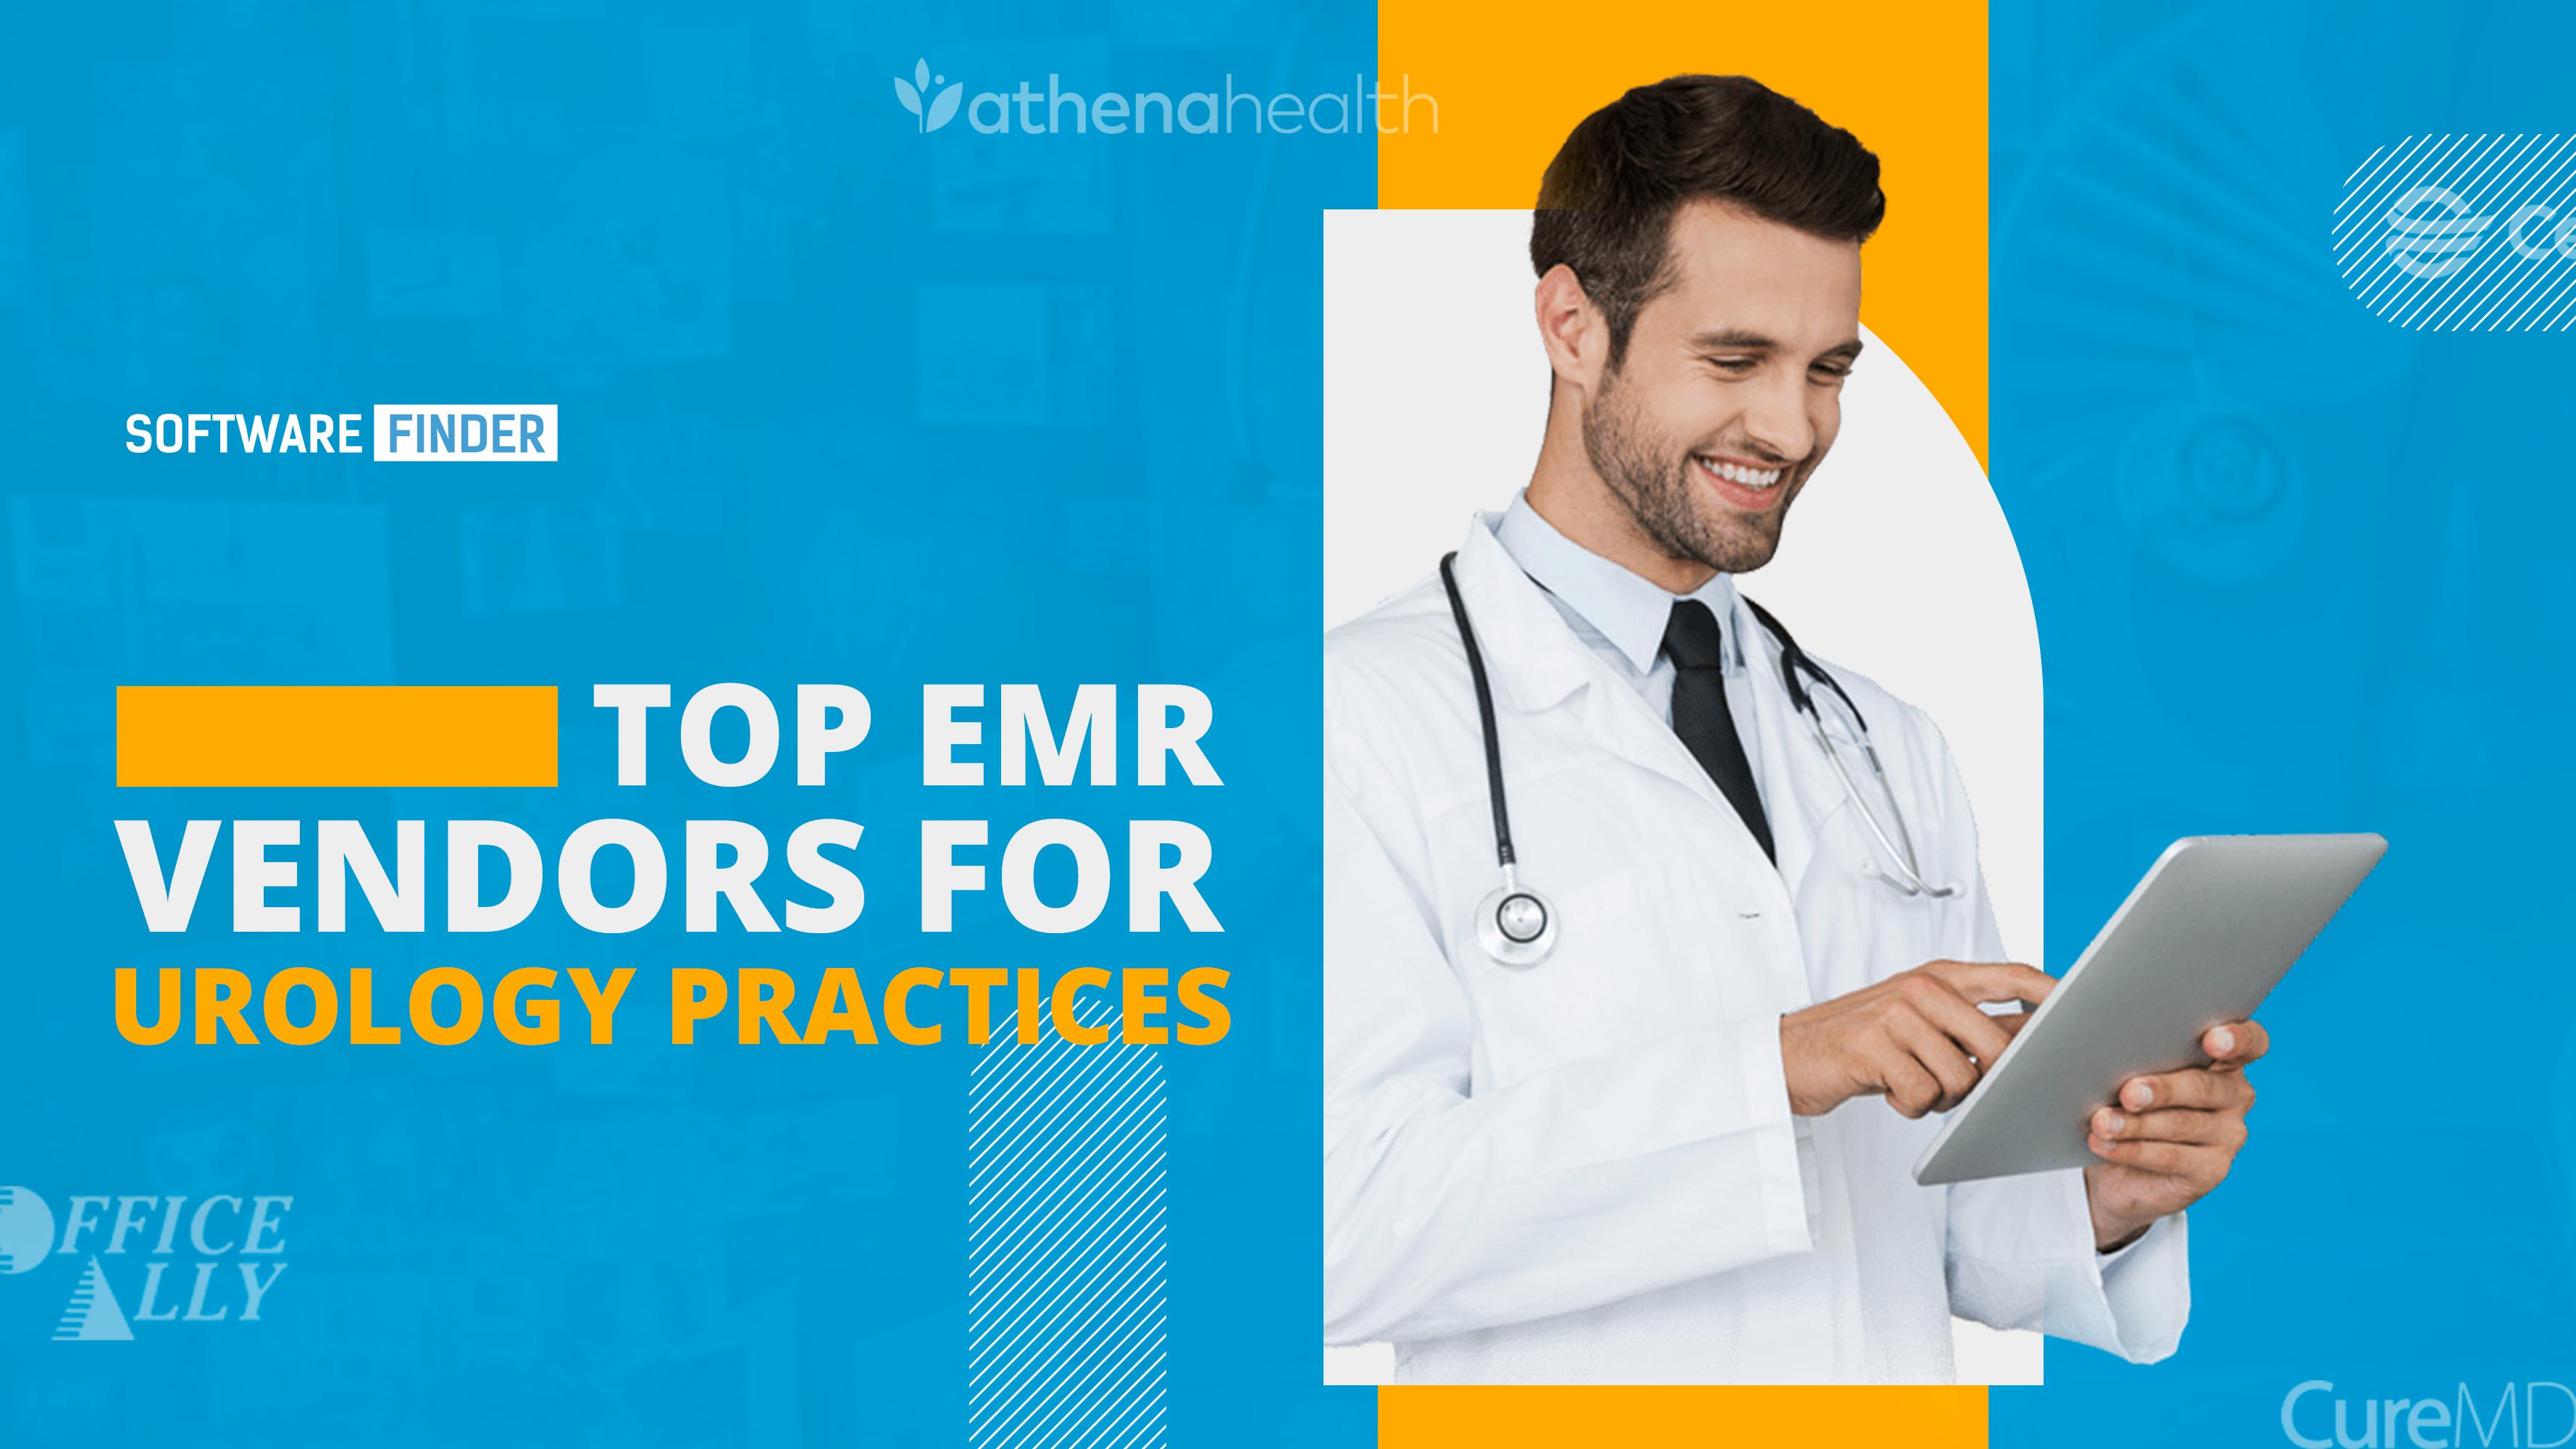 Top EMR Vendors for Urology Practices